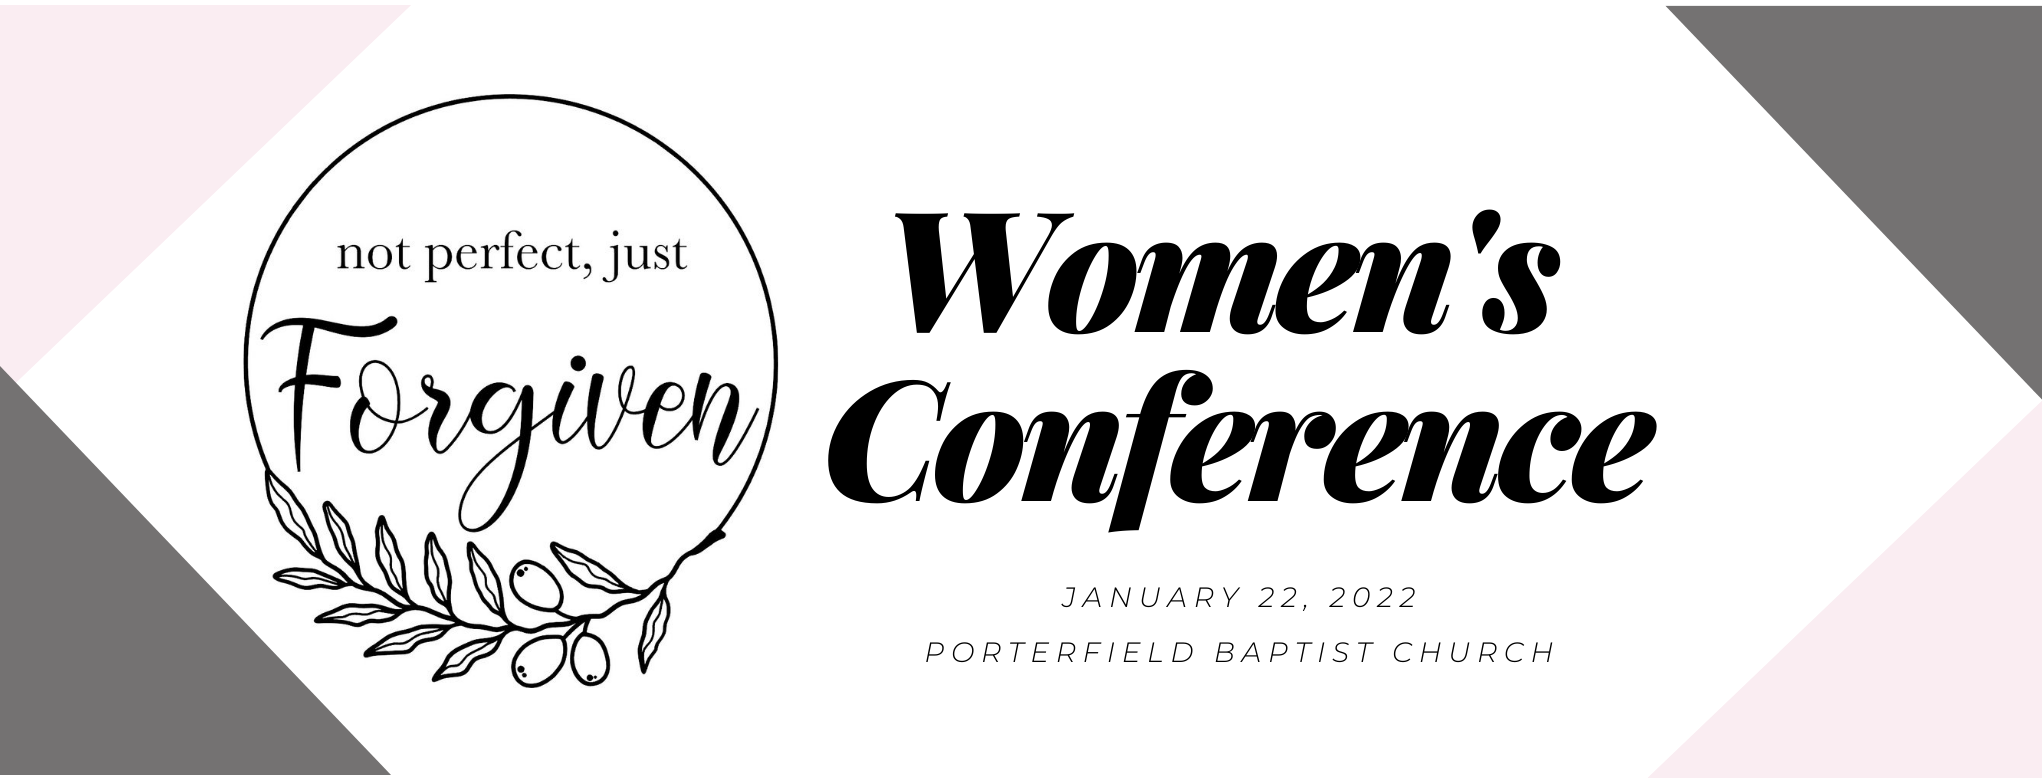 Womens Conference 2022 Porterfield Baptist Church